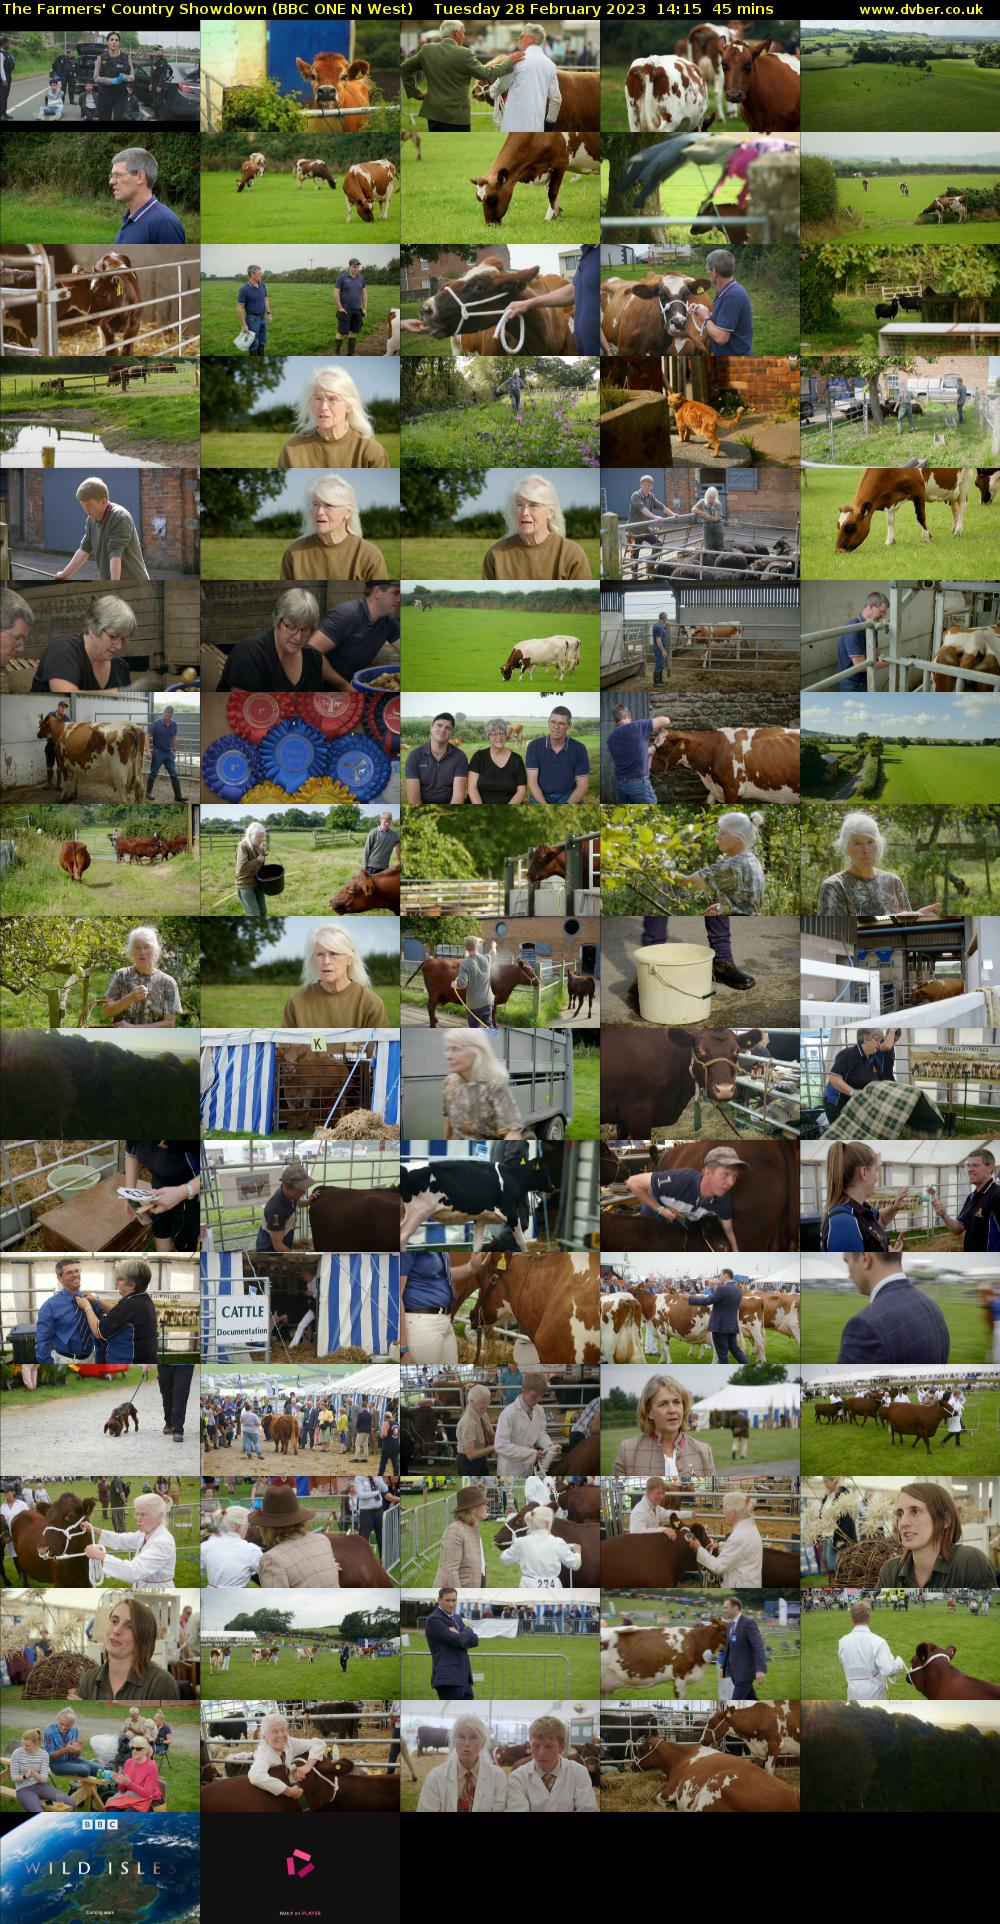 The Farmers' Country Showdown (BBC ONE N West) Tuesday 28 February 2023 14:15 - 15:00